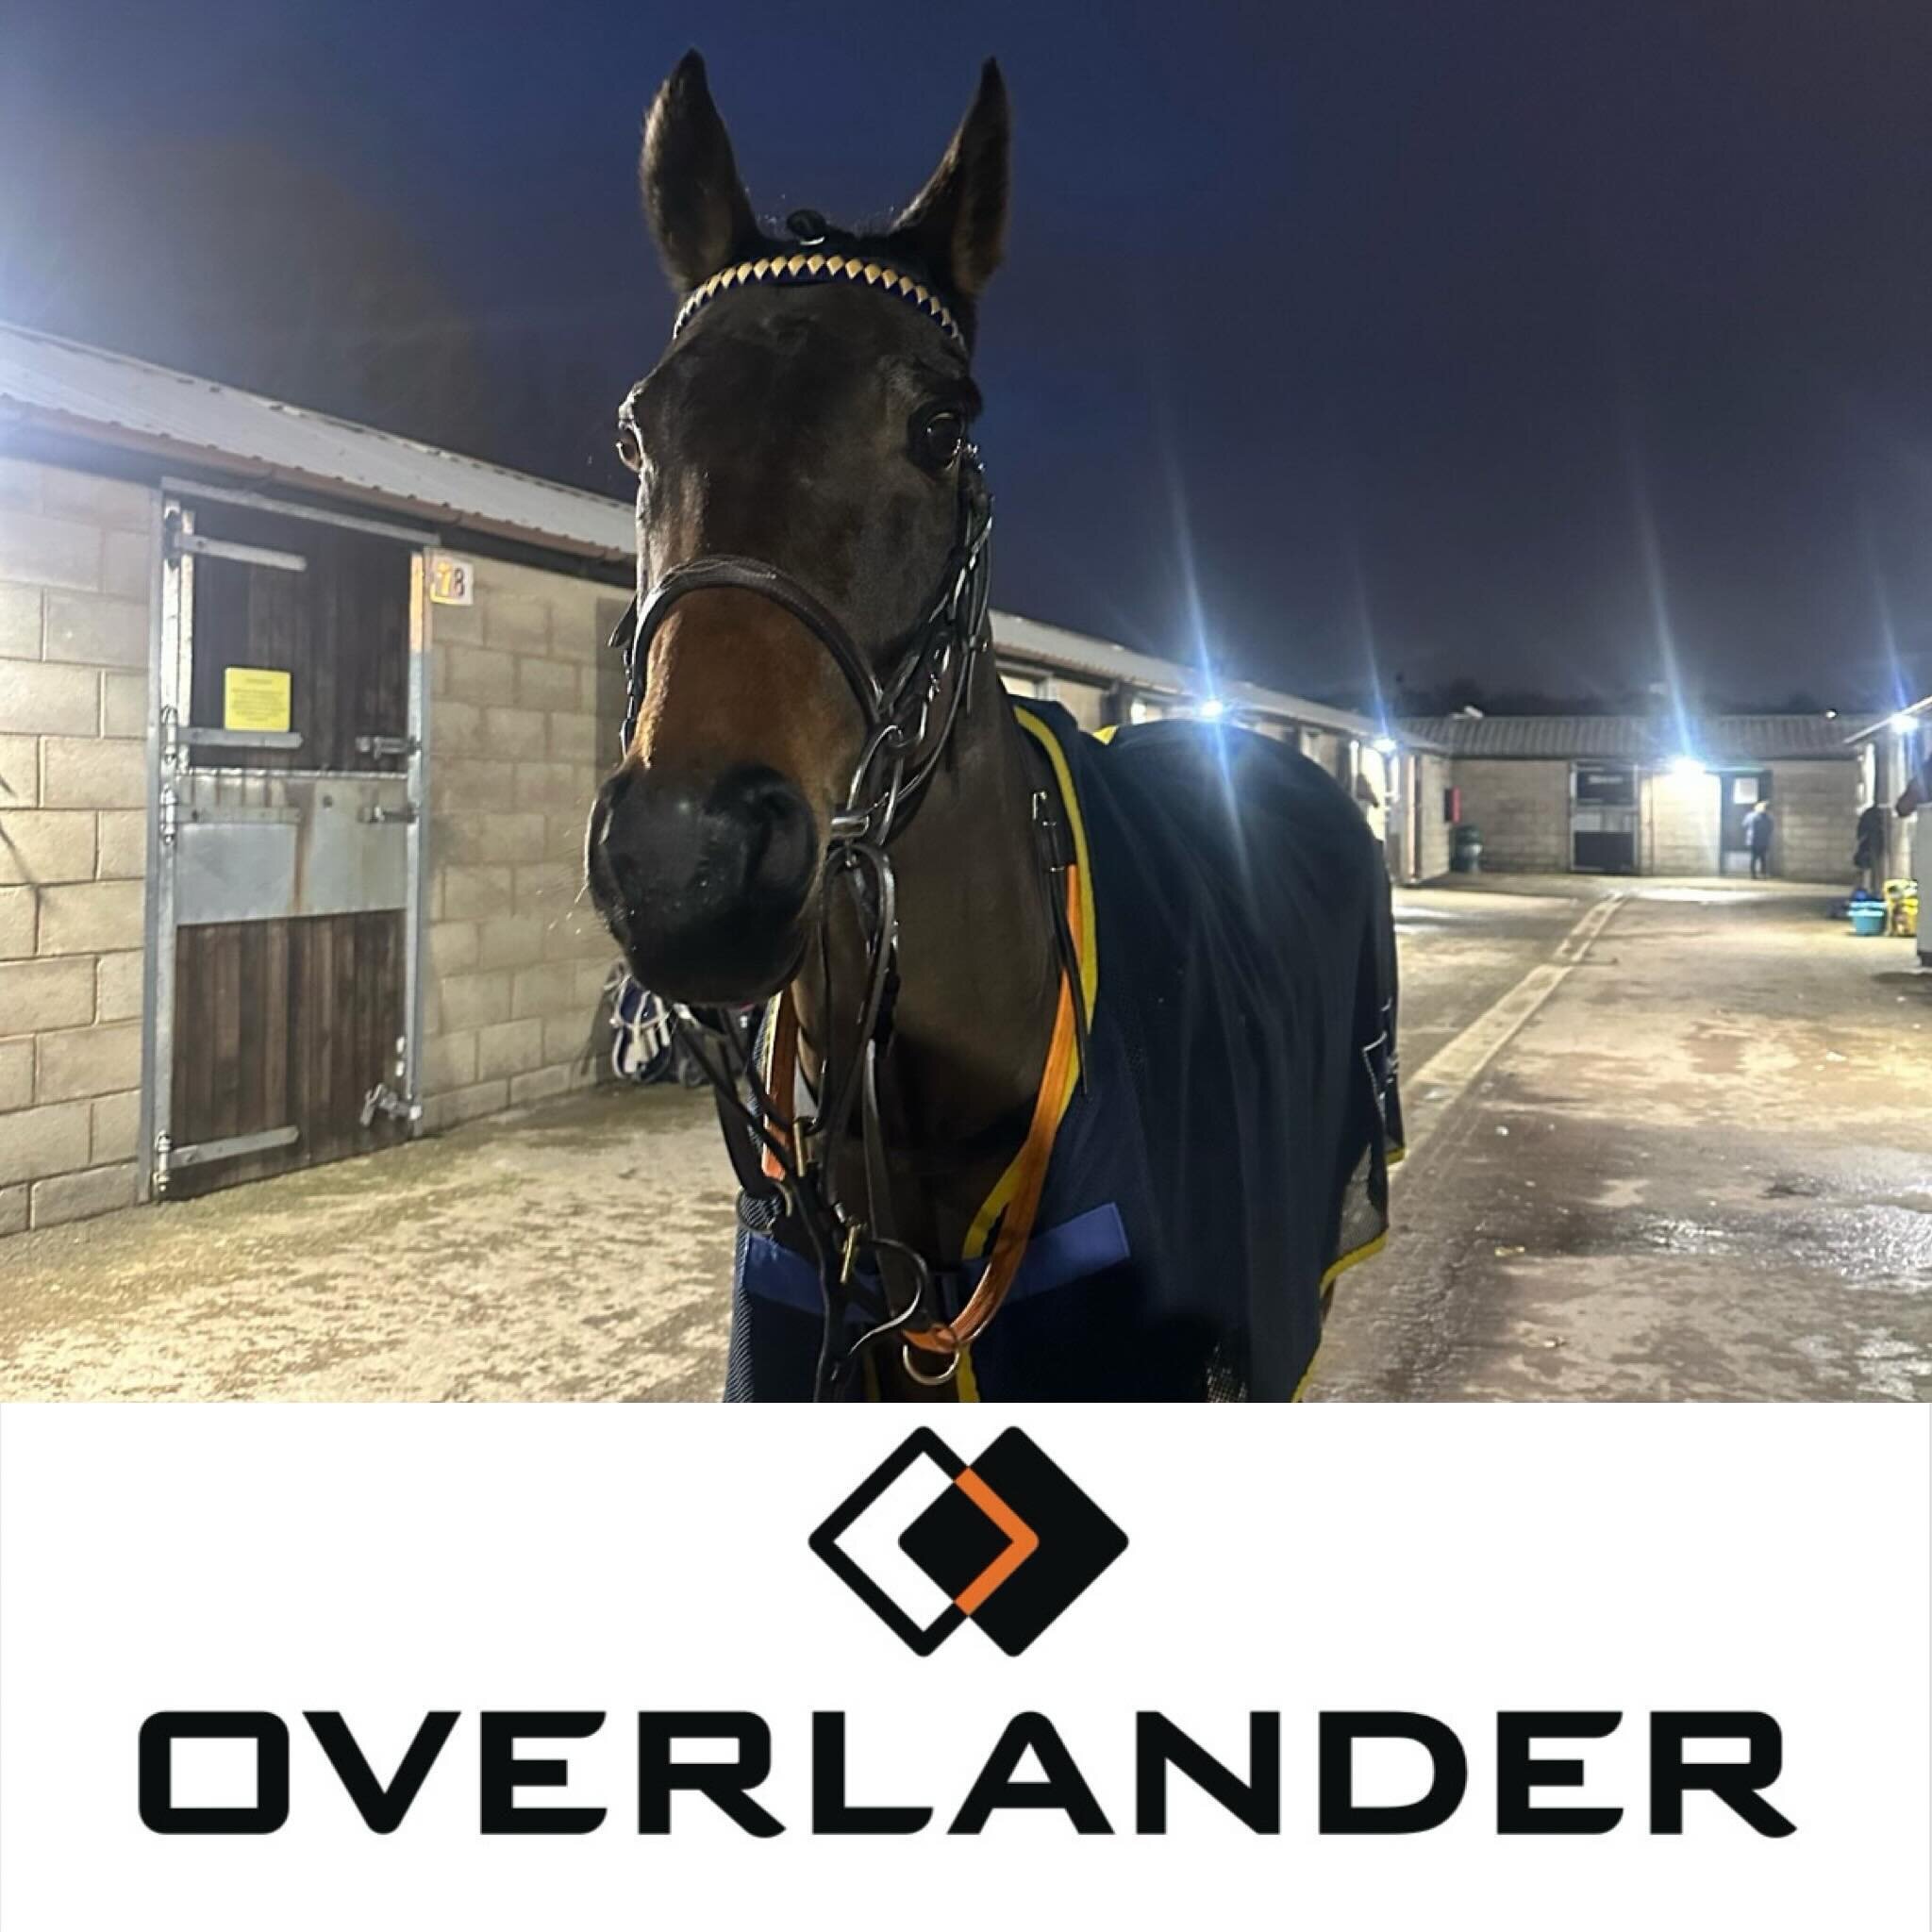 A night @wolvesraces 

8.30 Moondial lines up for The Katie Scott Racing Partnership under Phil Dennis.

Good Luck Everyone 
🍀🍀🍀

@overlandervehicles 🚚🚛